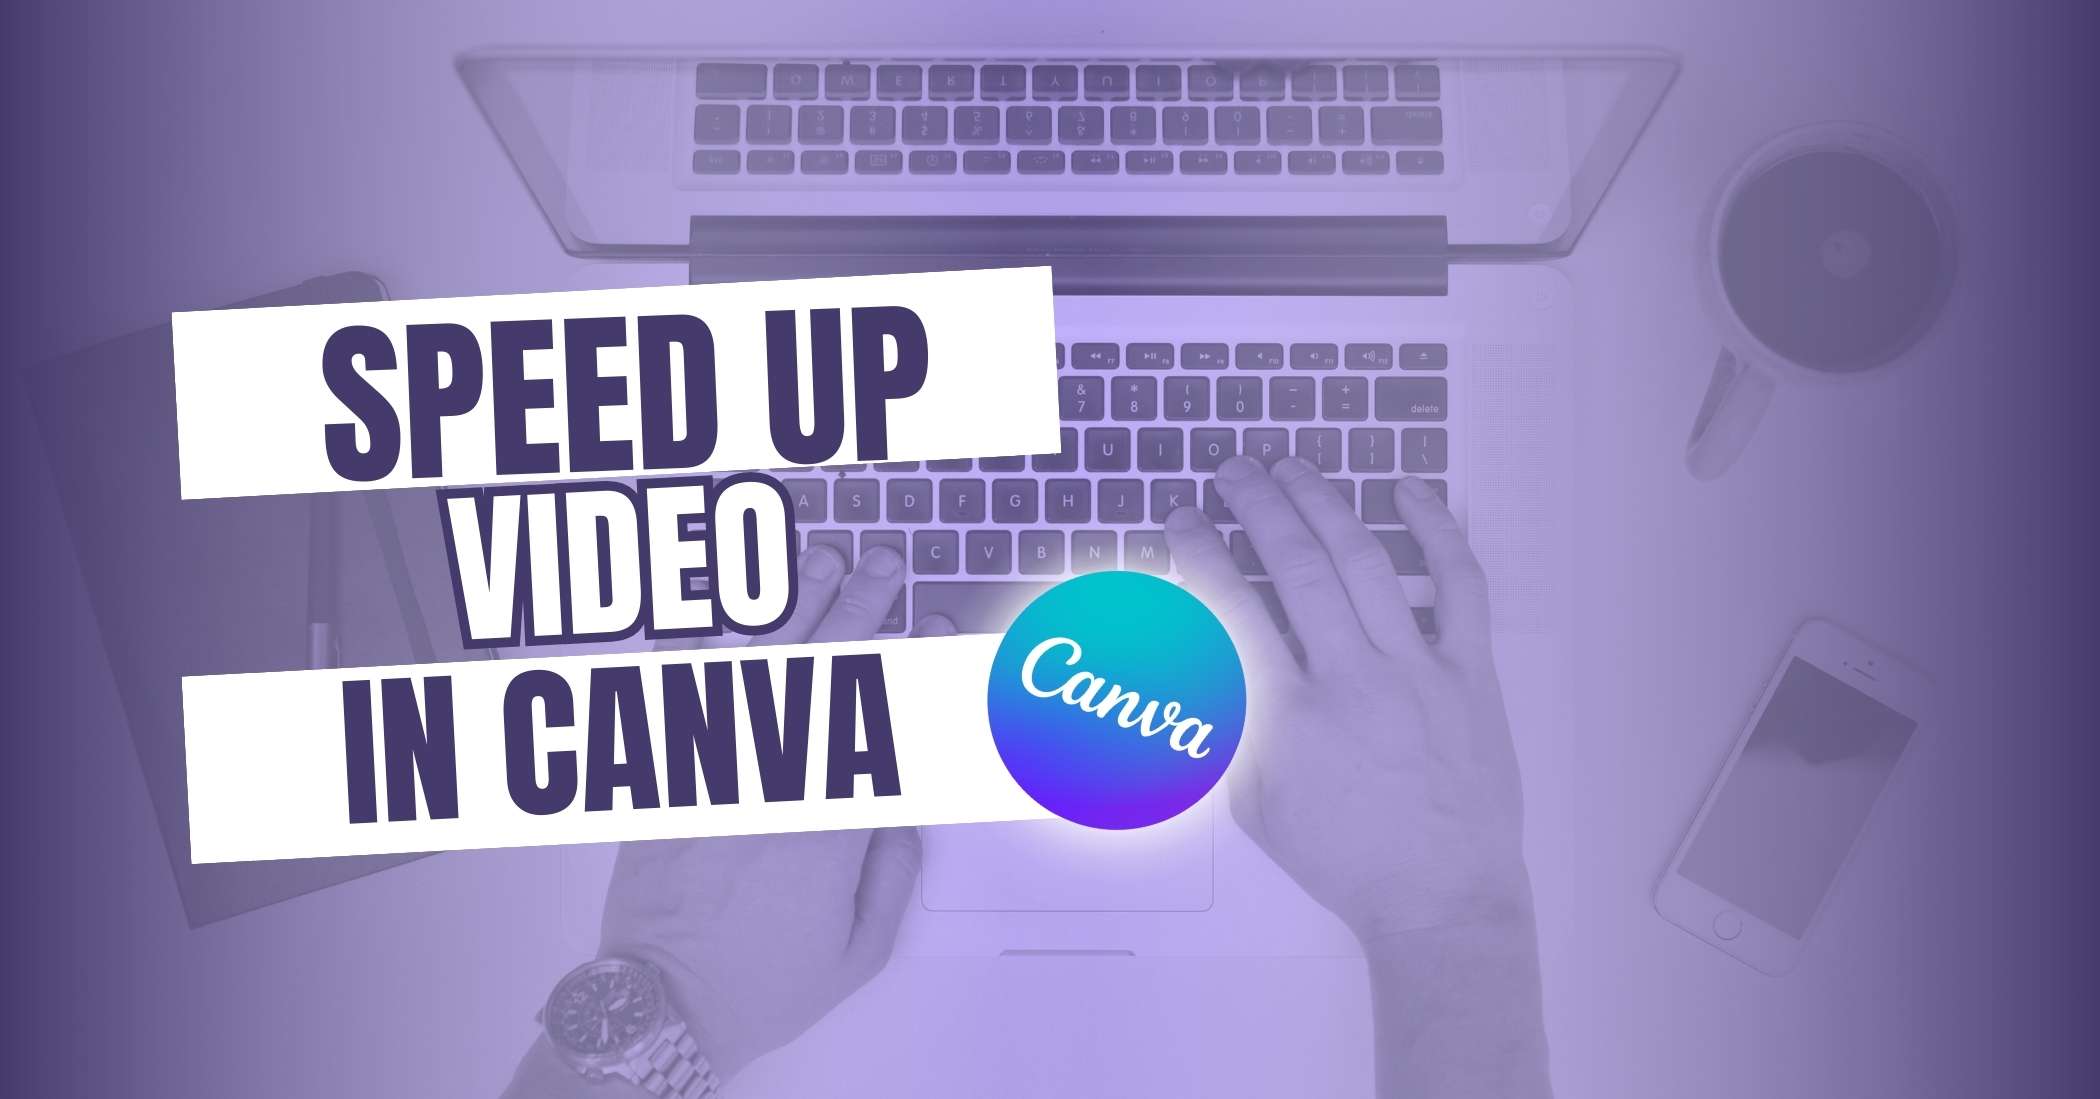 How to speed up video in Canva